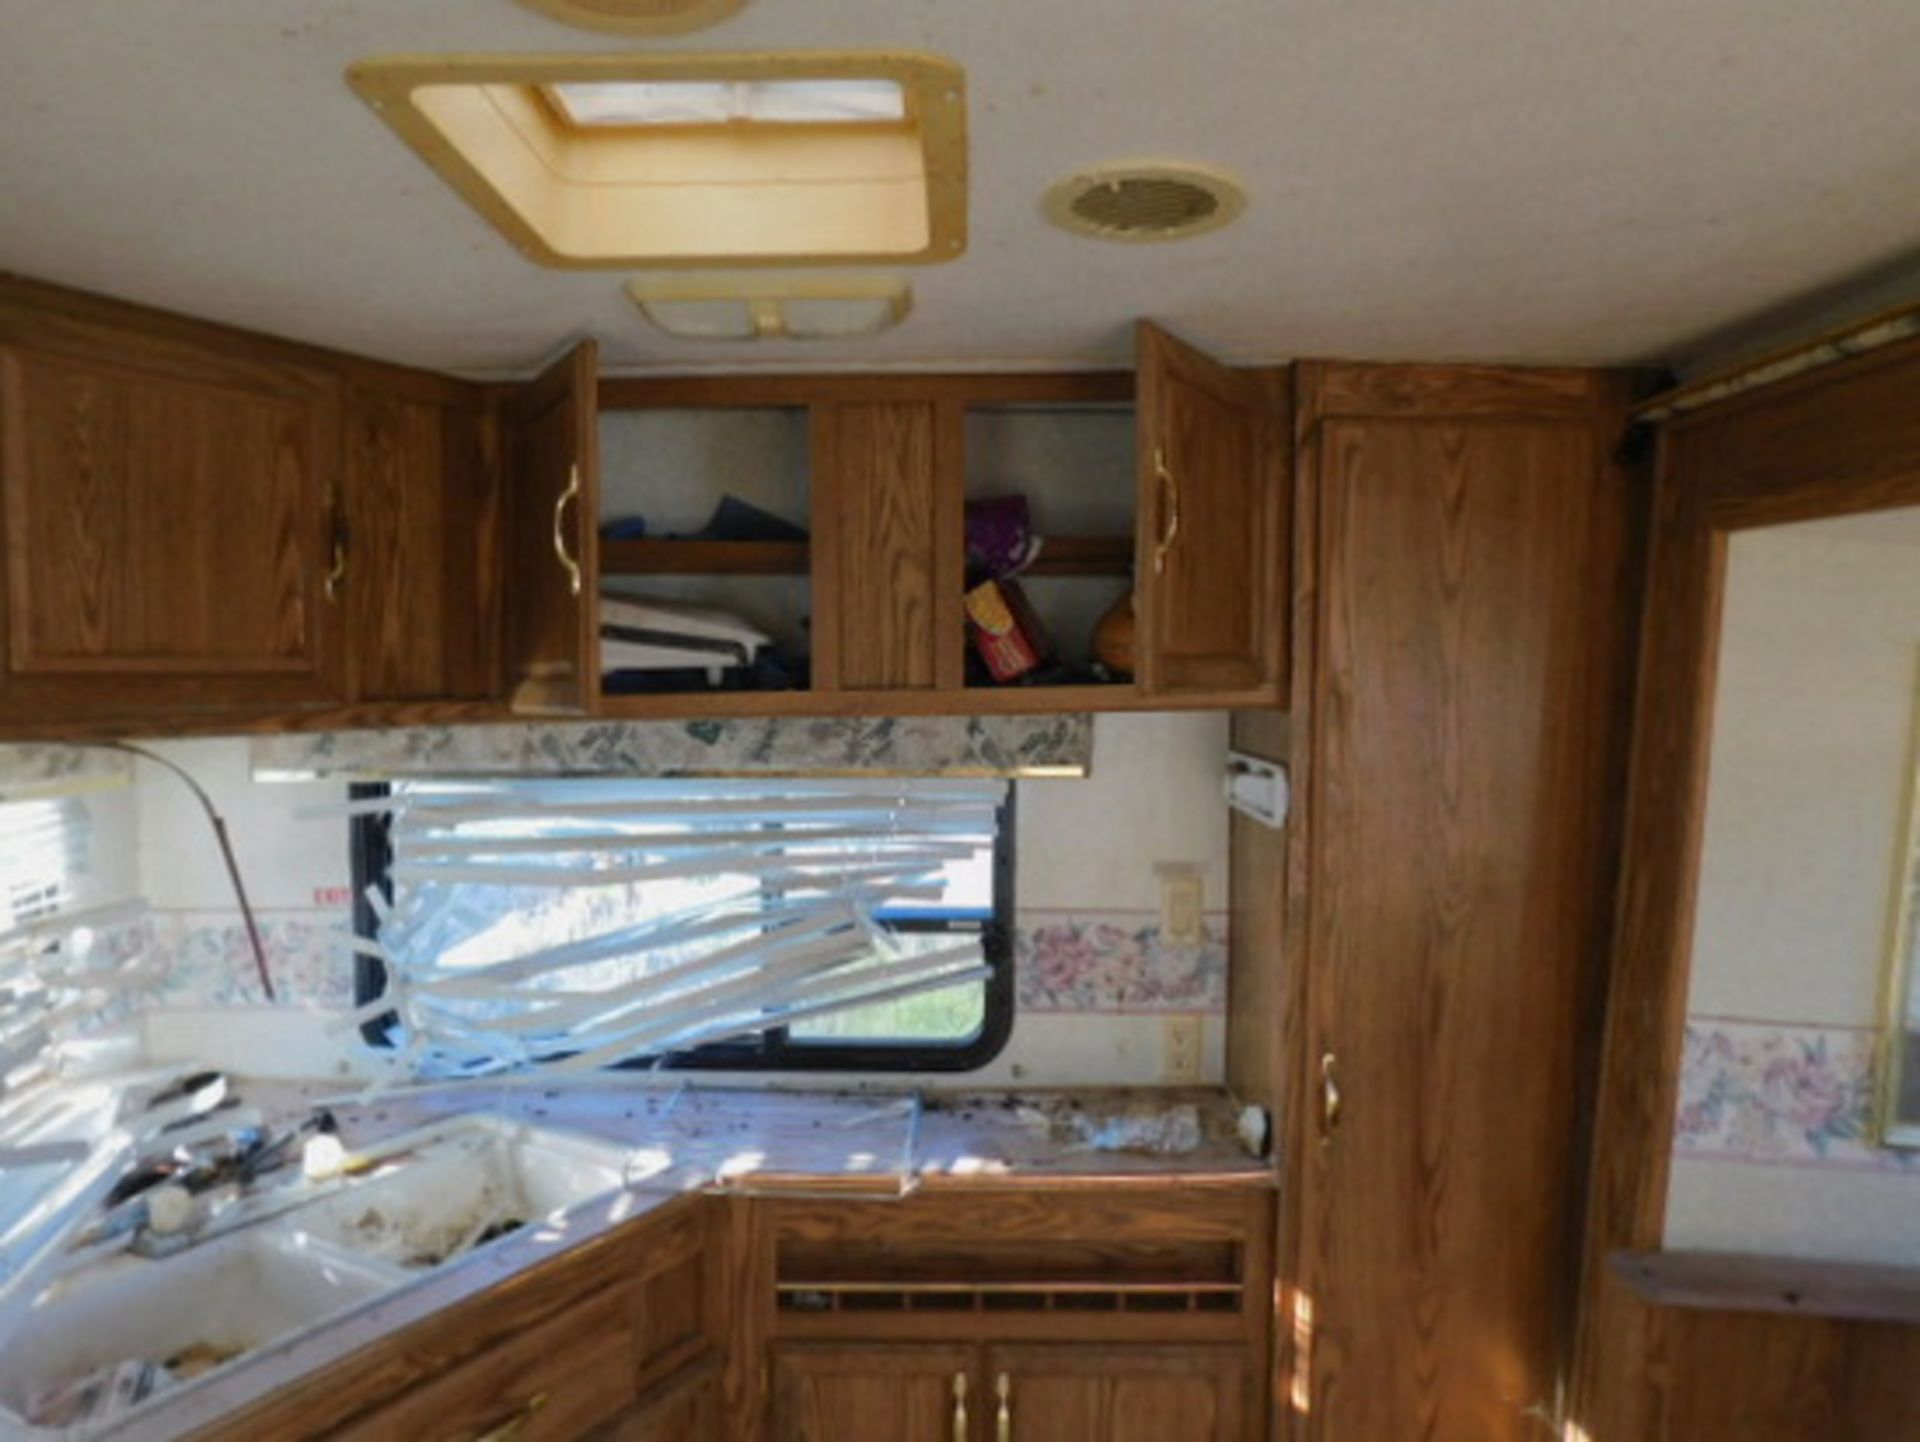 PROWLER 24' TRAVEL TRAILER WITH SLIDE OUT - Image 8 of 9